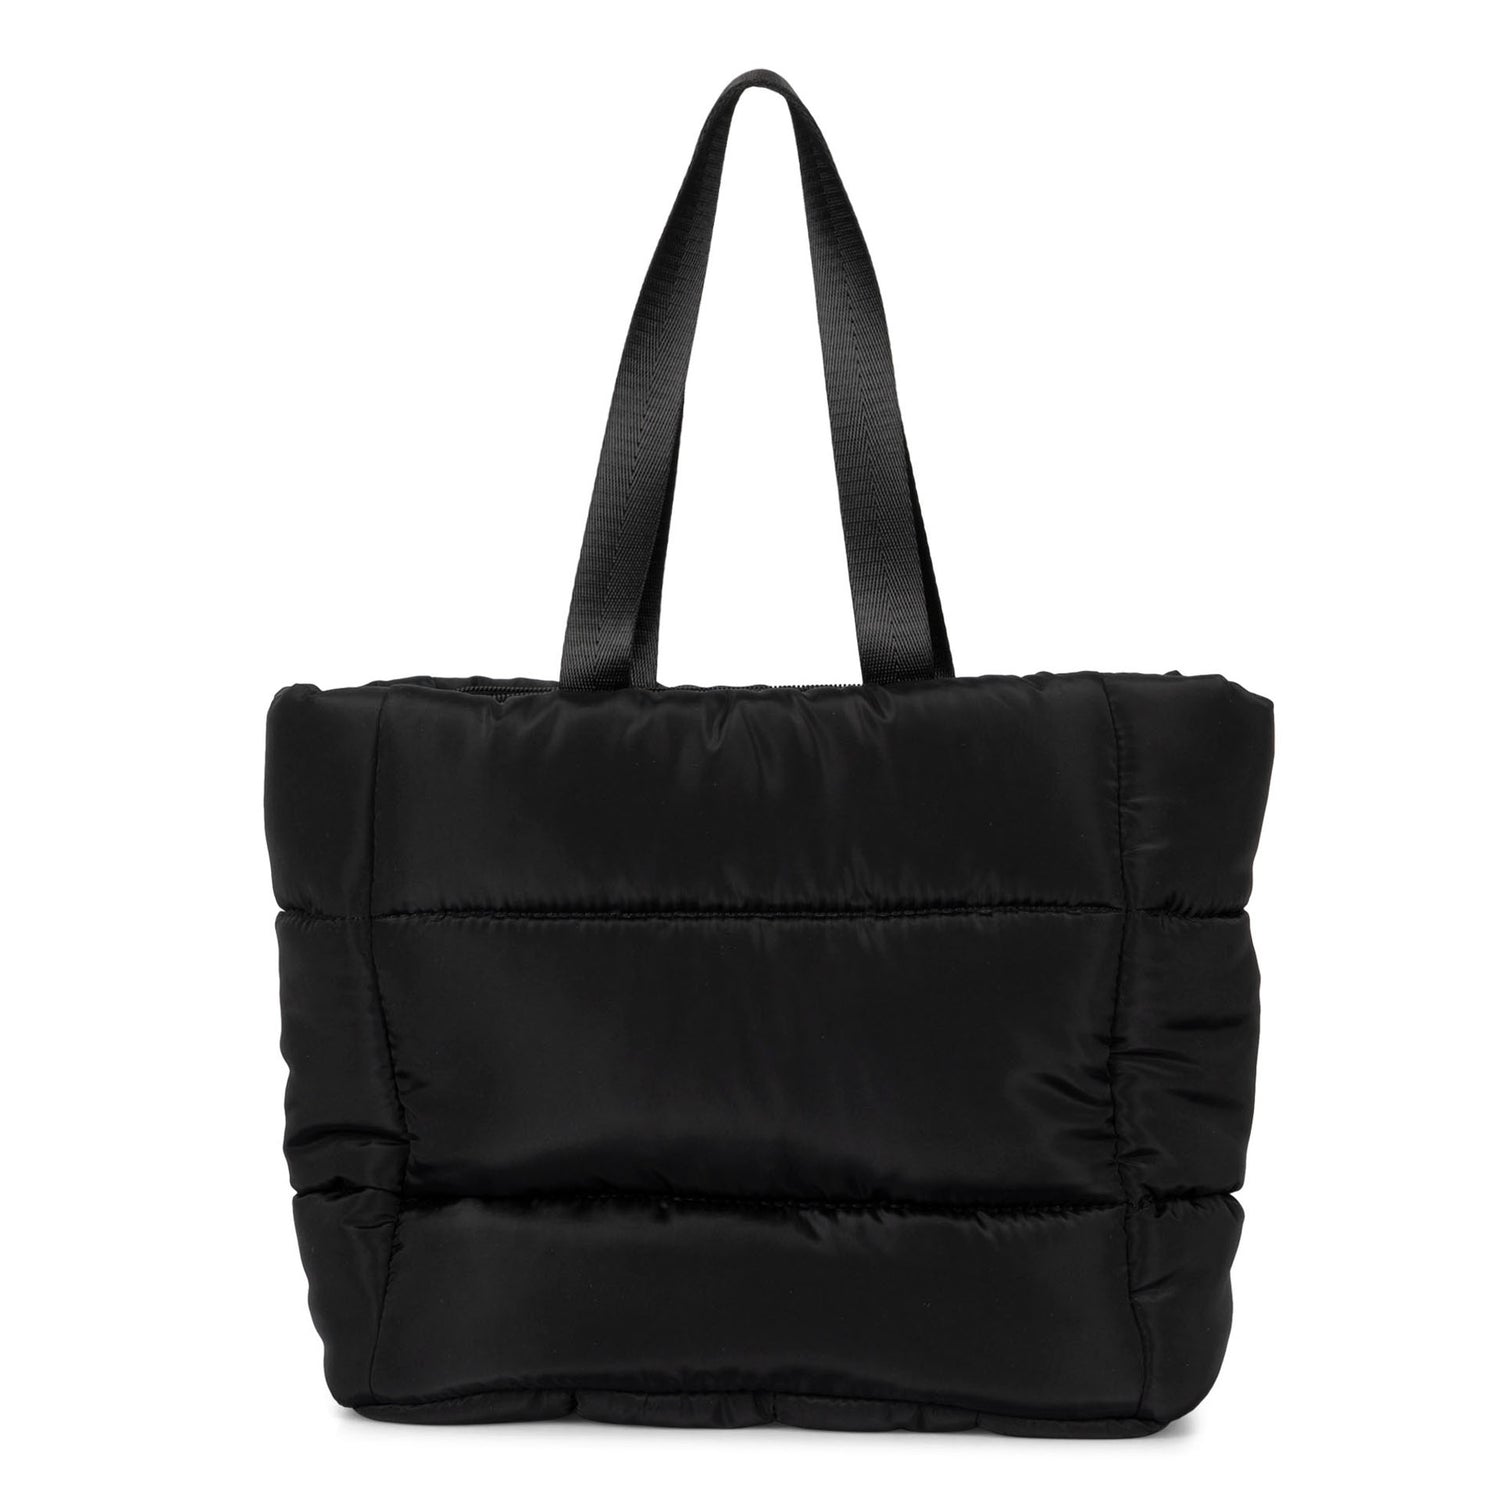 Frontside of a black lunch tote bag called Urban Quilted designed by Tracker on a white background, showcasing its long top handles.